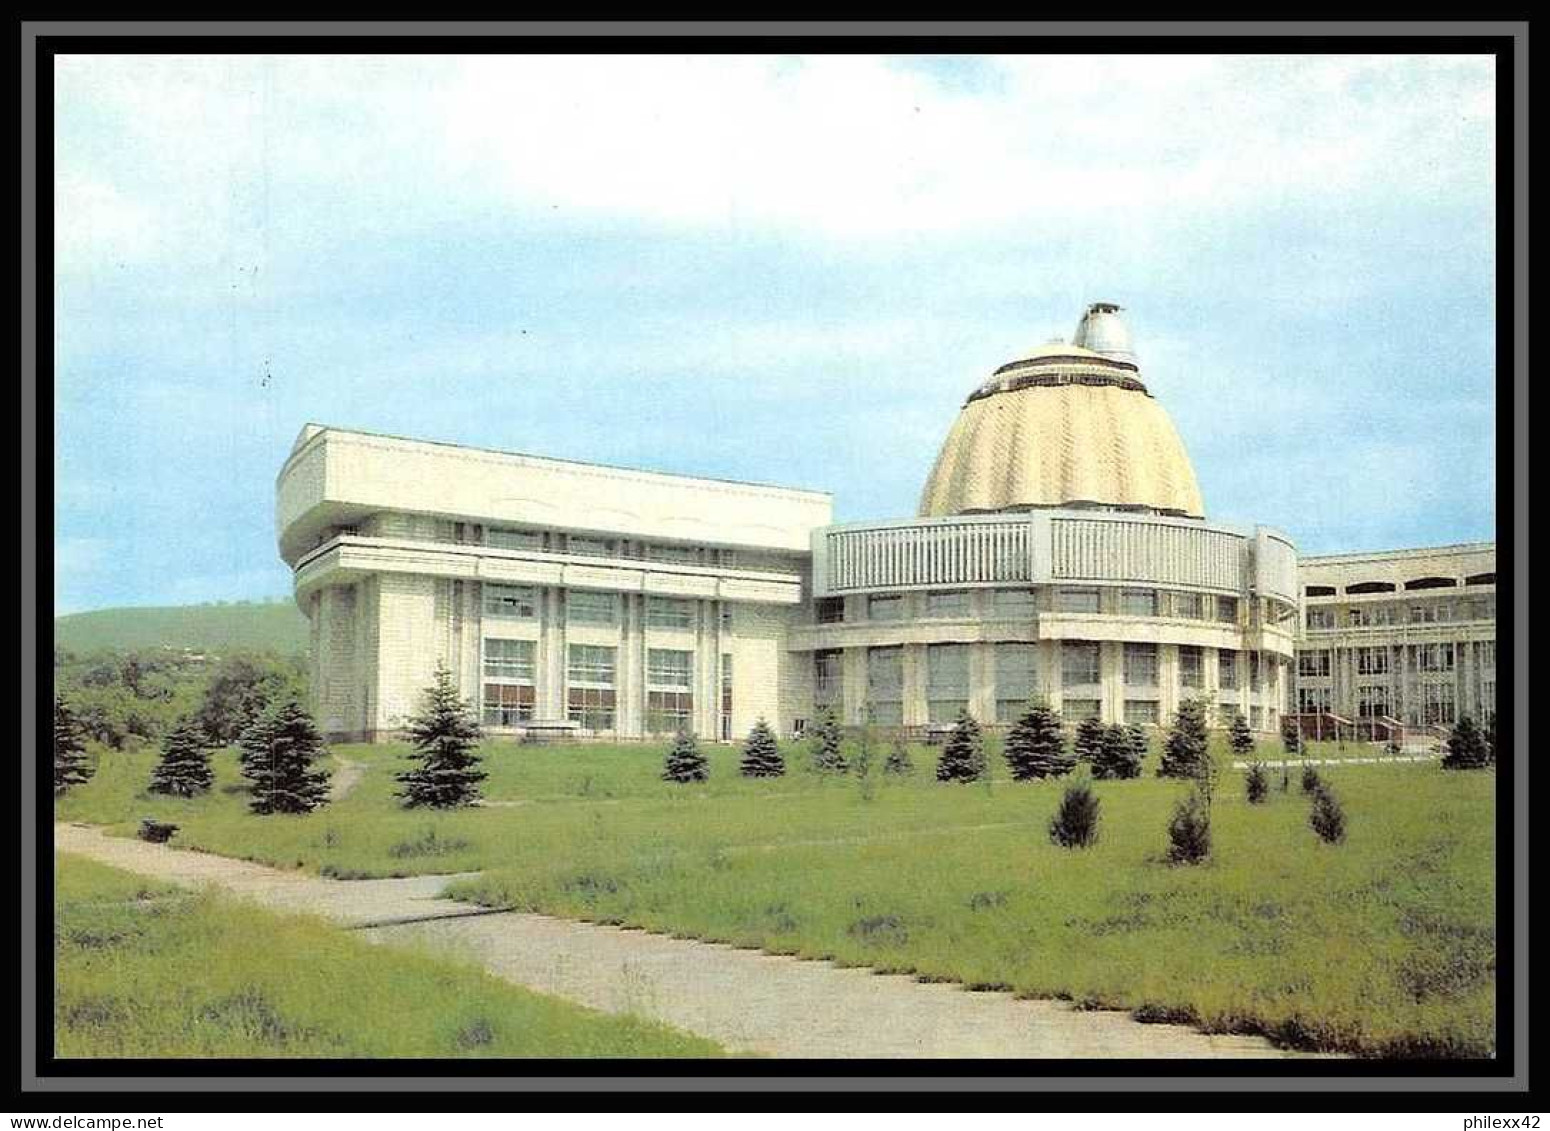 10033/ Espace (space) 9 Entier postal (Stamped Stationery) 29/8/1989 (urss USSR)